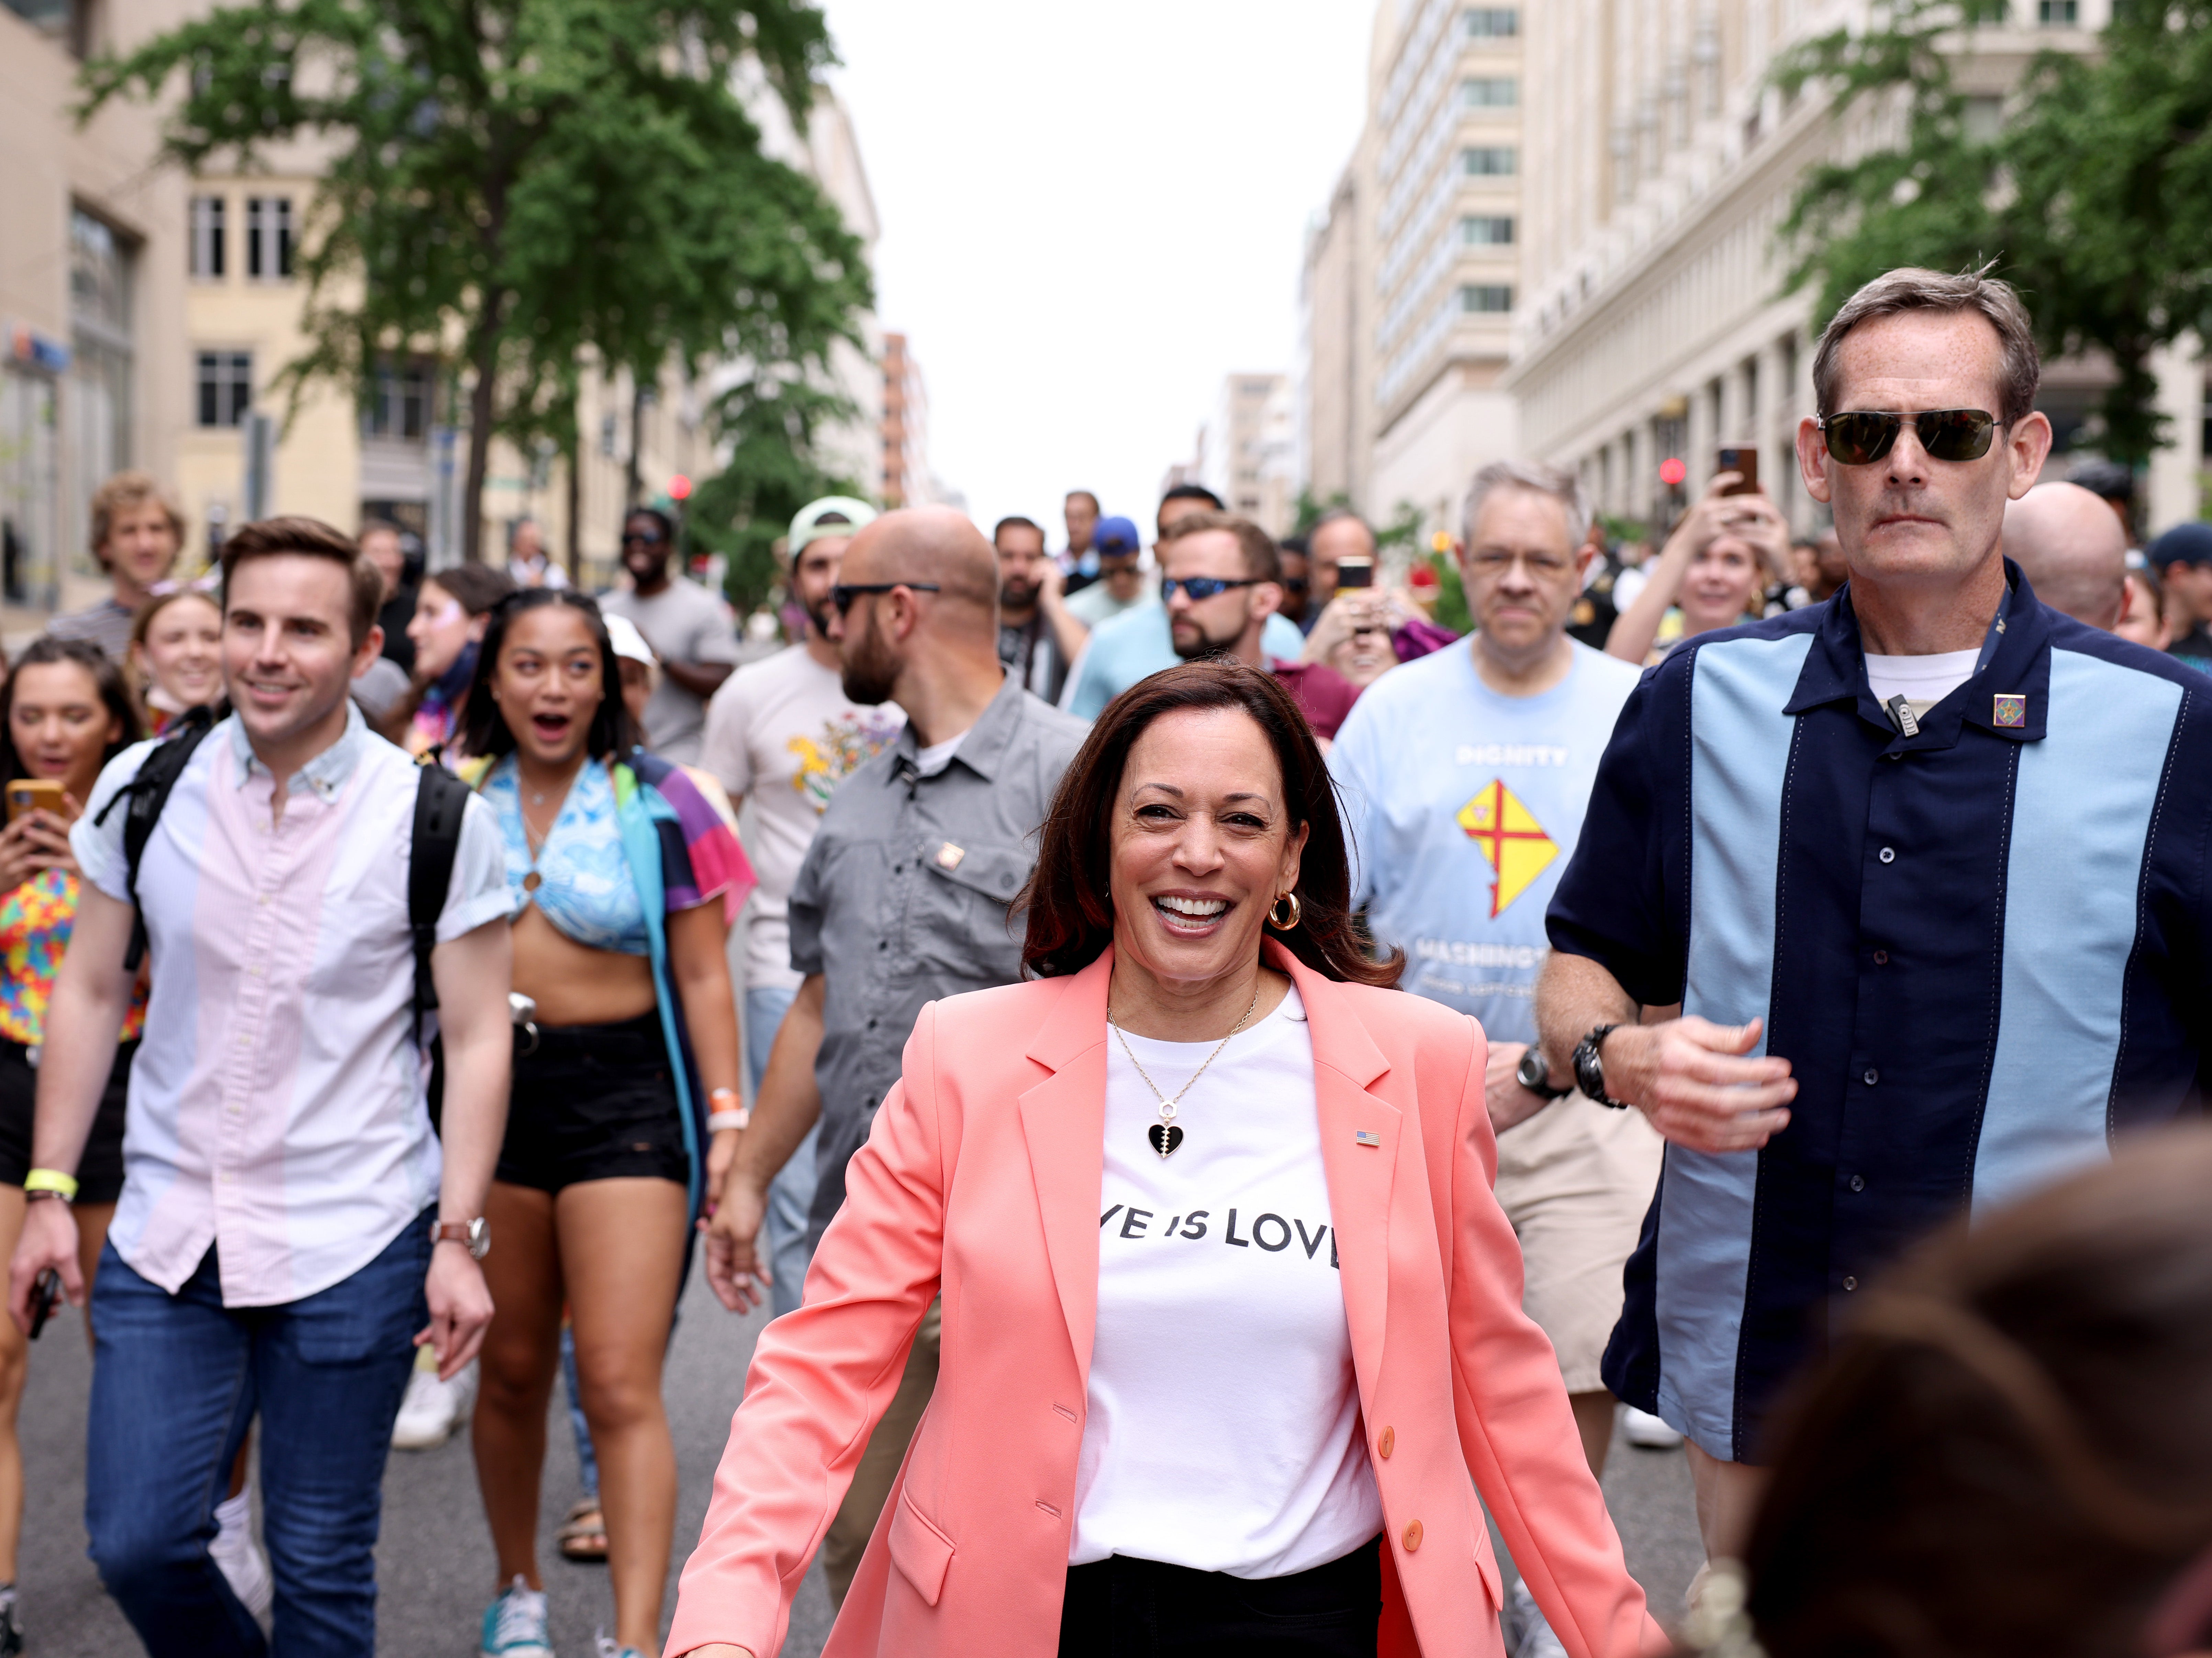 Vice President Kamala Harris joins marchers for the Capital Pride Parade on June 12, 2021 in Washington, DC. Capital Pride returned to Washington DC, after being canceled last year due to the Covid-19 pandemic